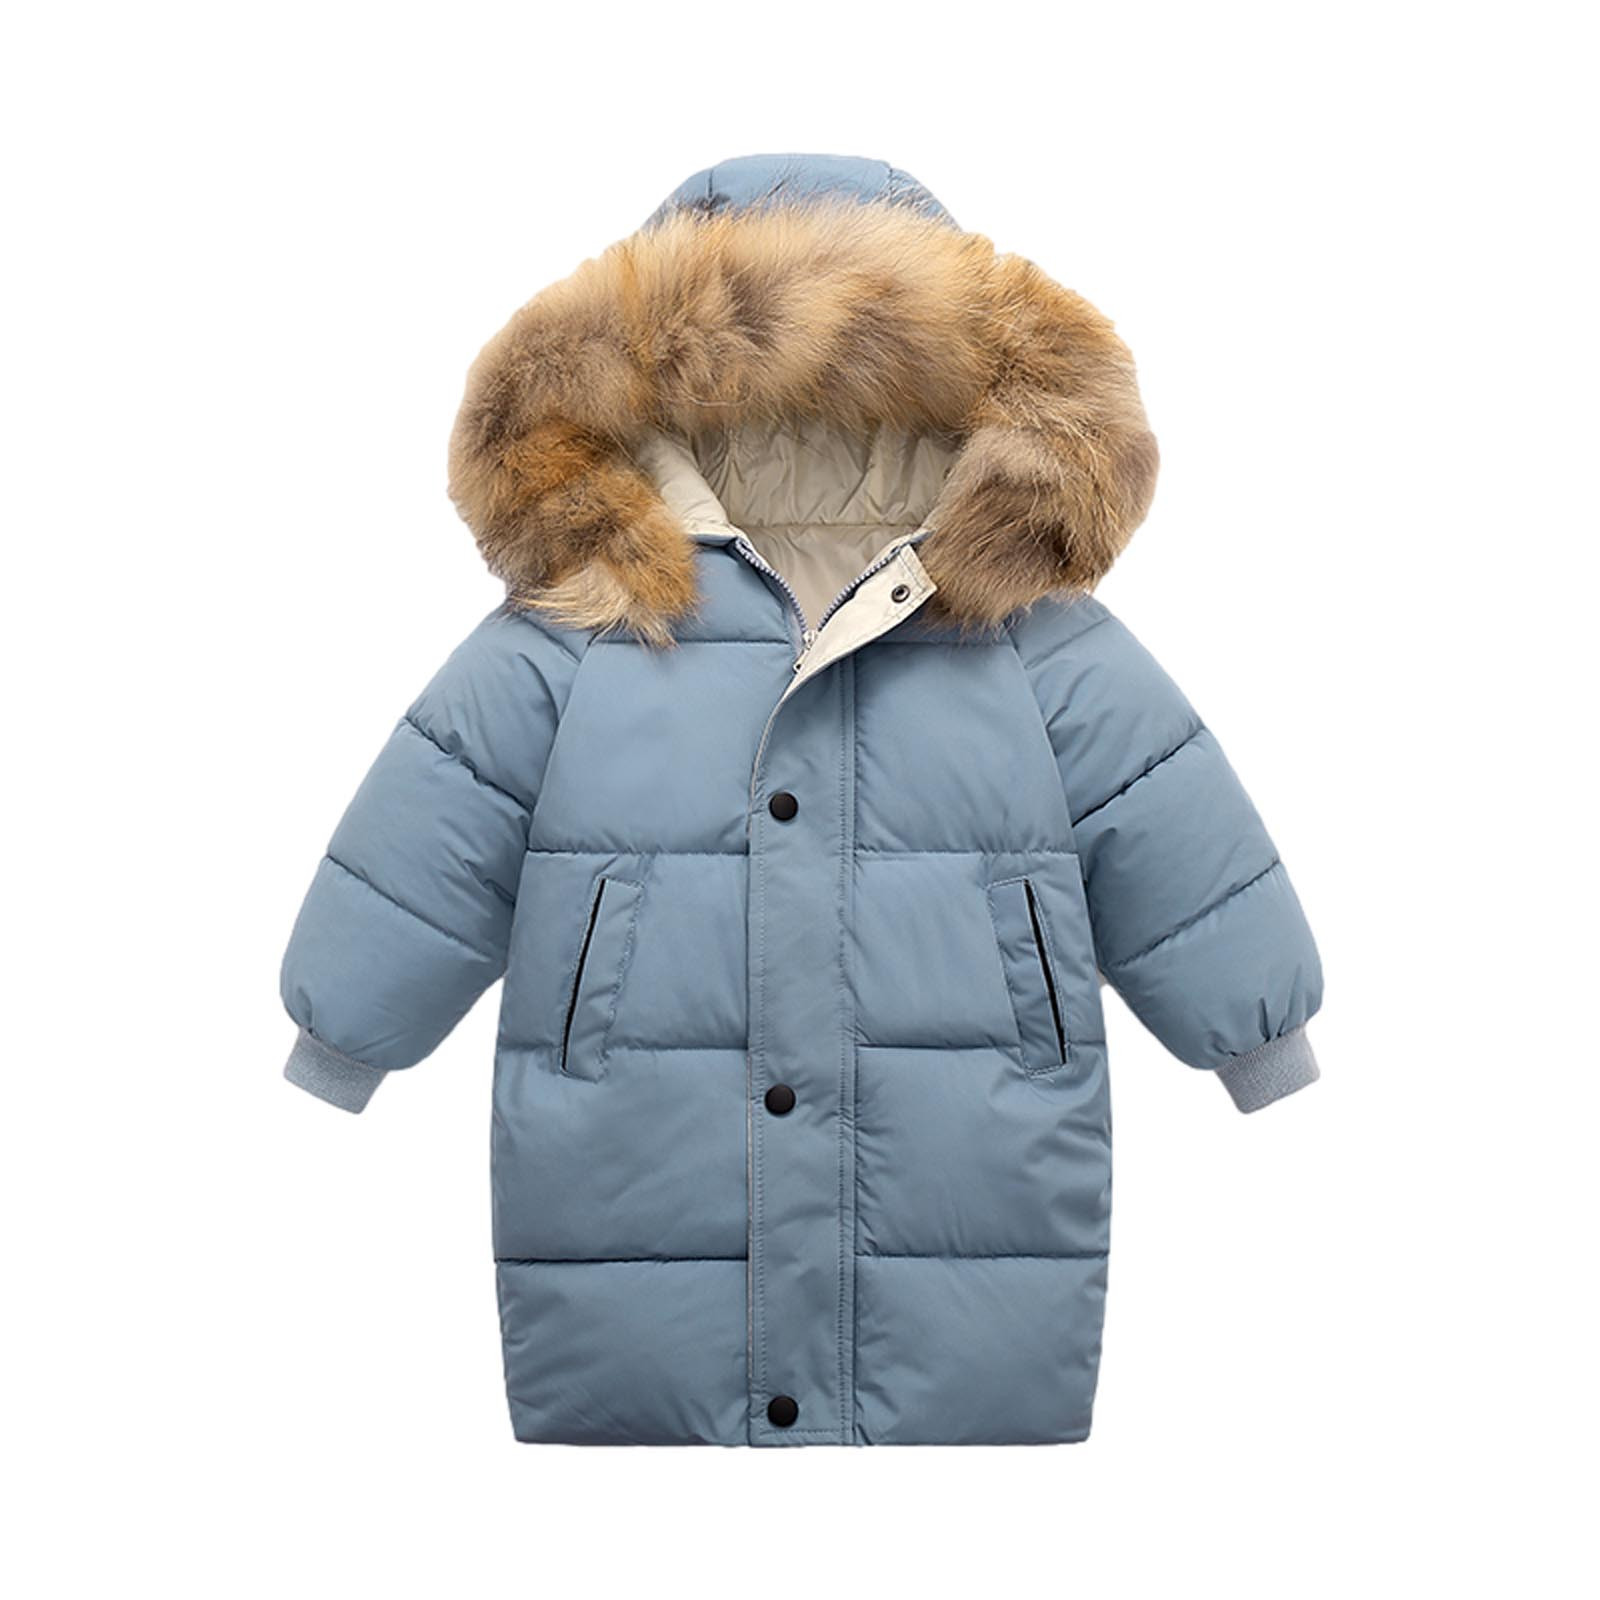 Verugu Toddler Baby Girls Boys Winter Coat Thicken Warm Jackets Baby Hooded Snow Outwear Coat Kids Thicken Warm Down Coat Winter Hooded Long Cotton Down Jackets Outerwears Blue, 12-24 Months - image 1 of 3